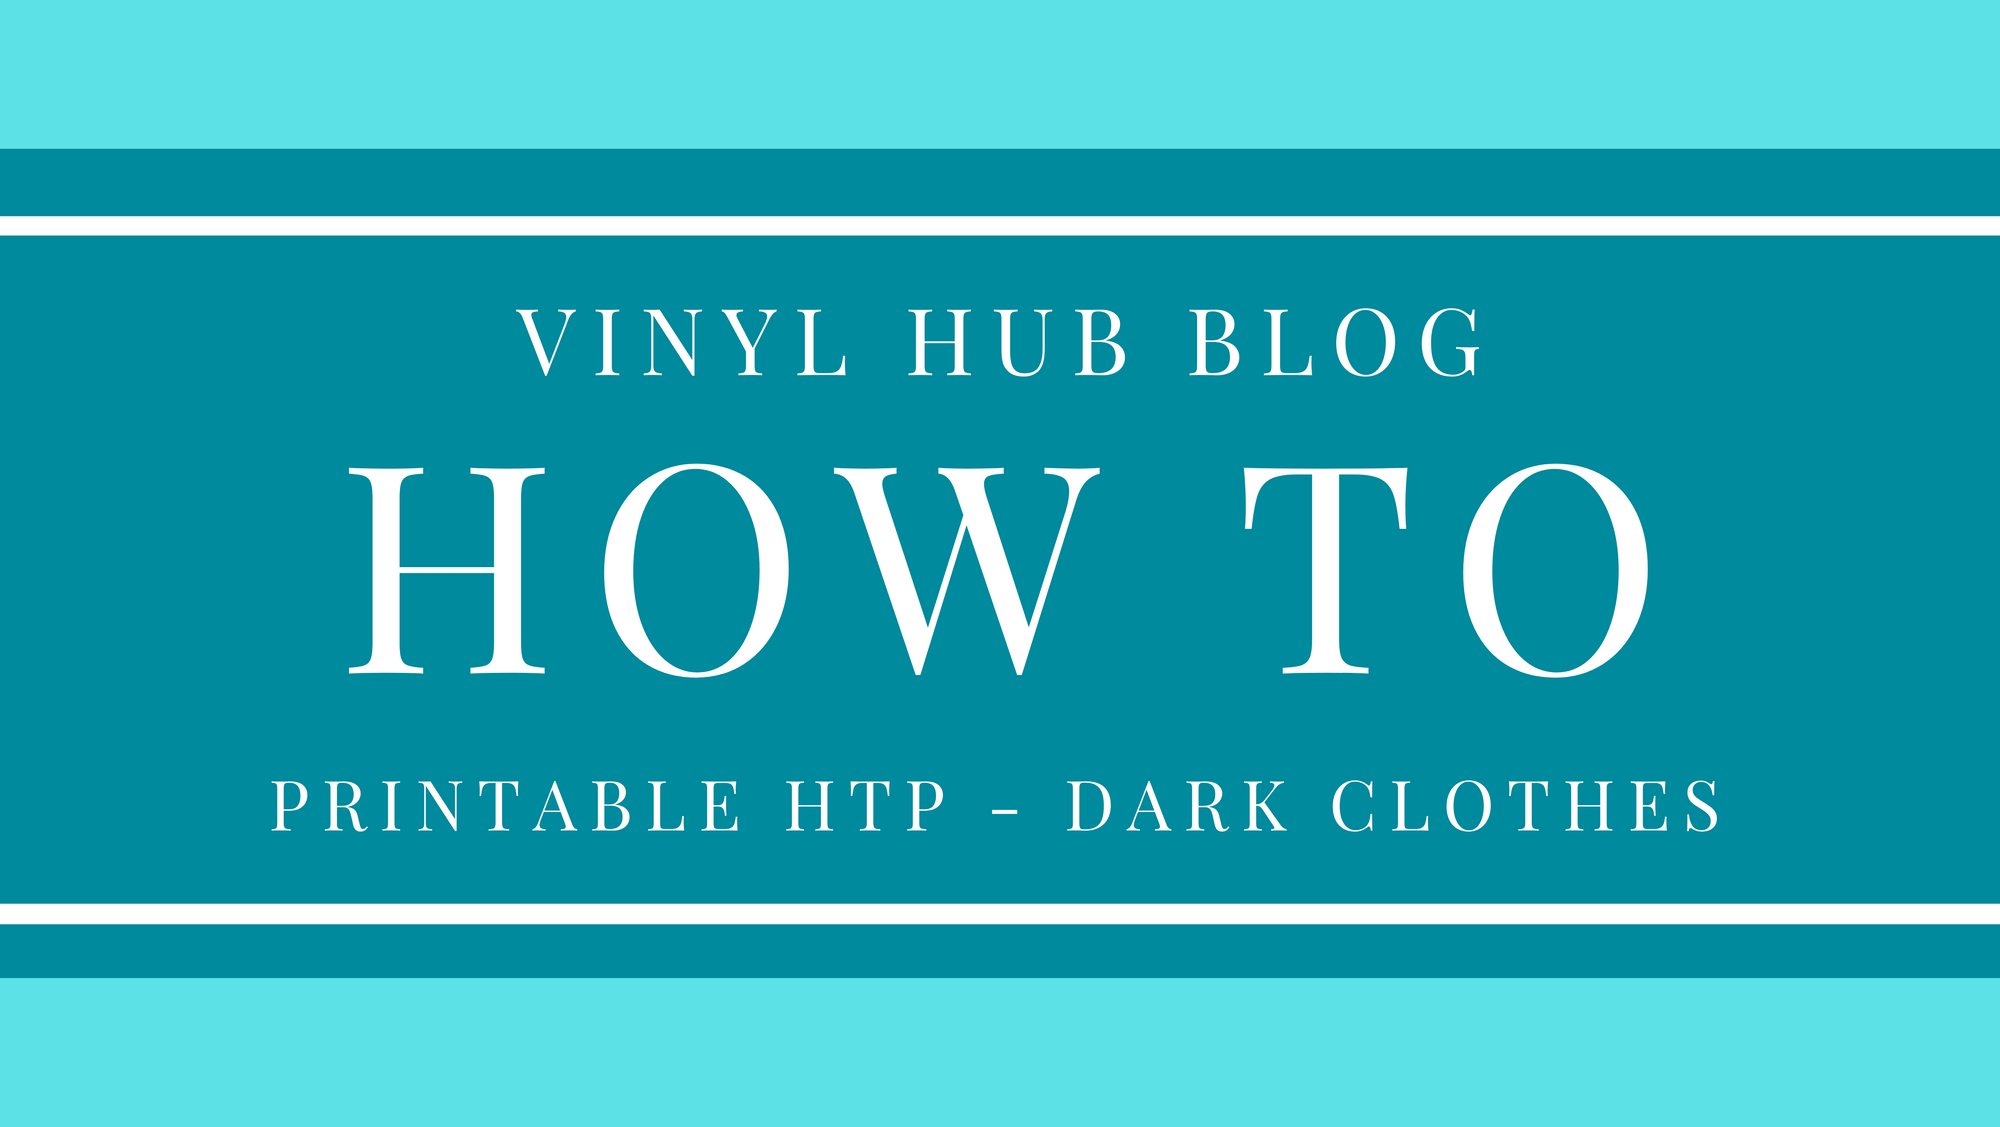 How To - Printable HTP - Dark Clothes